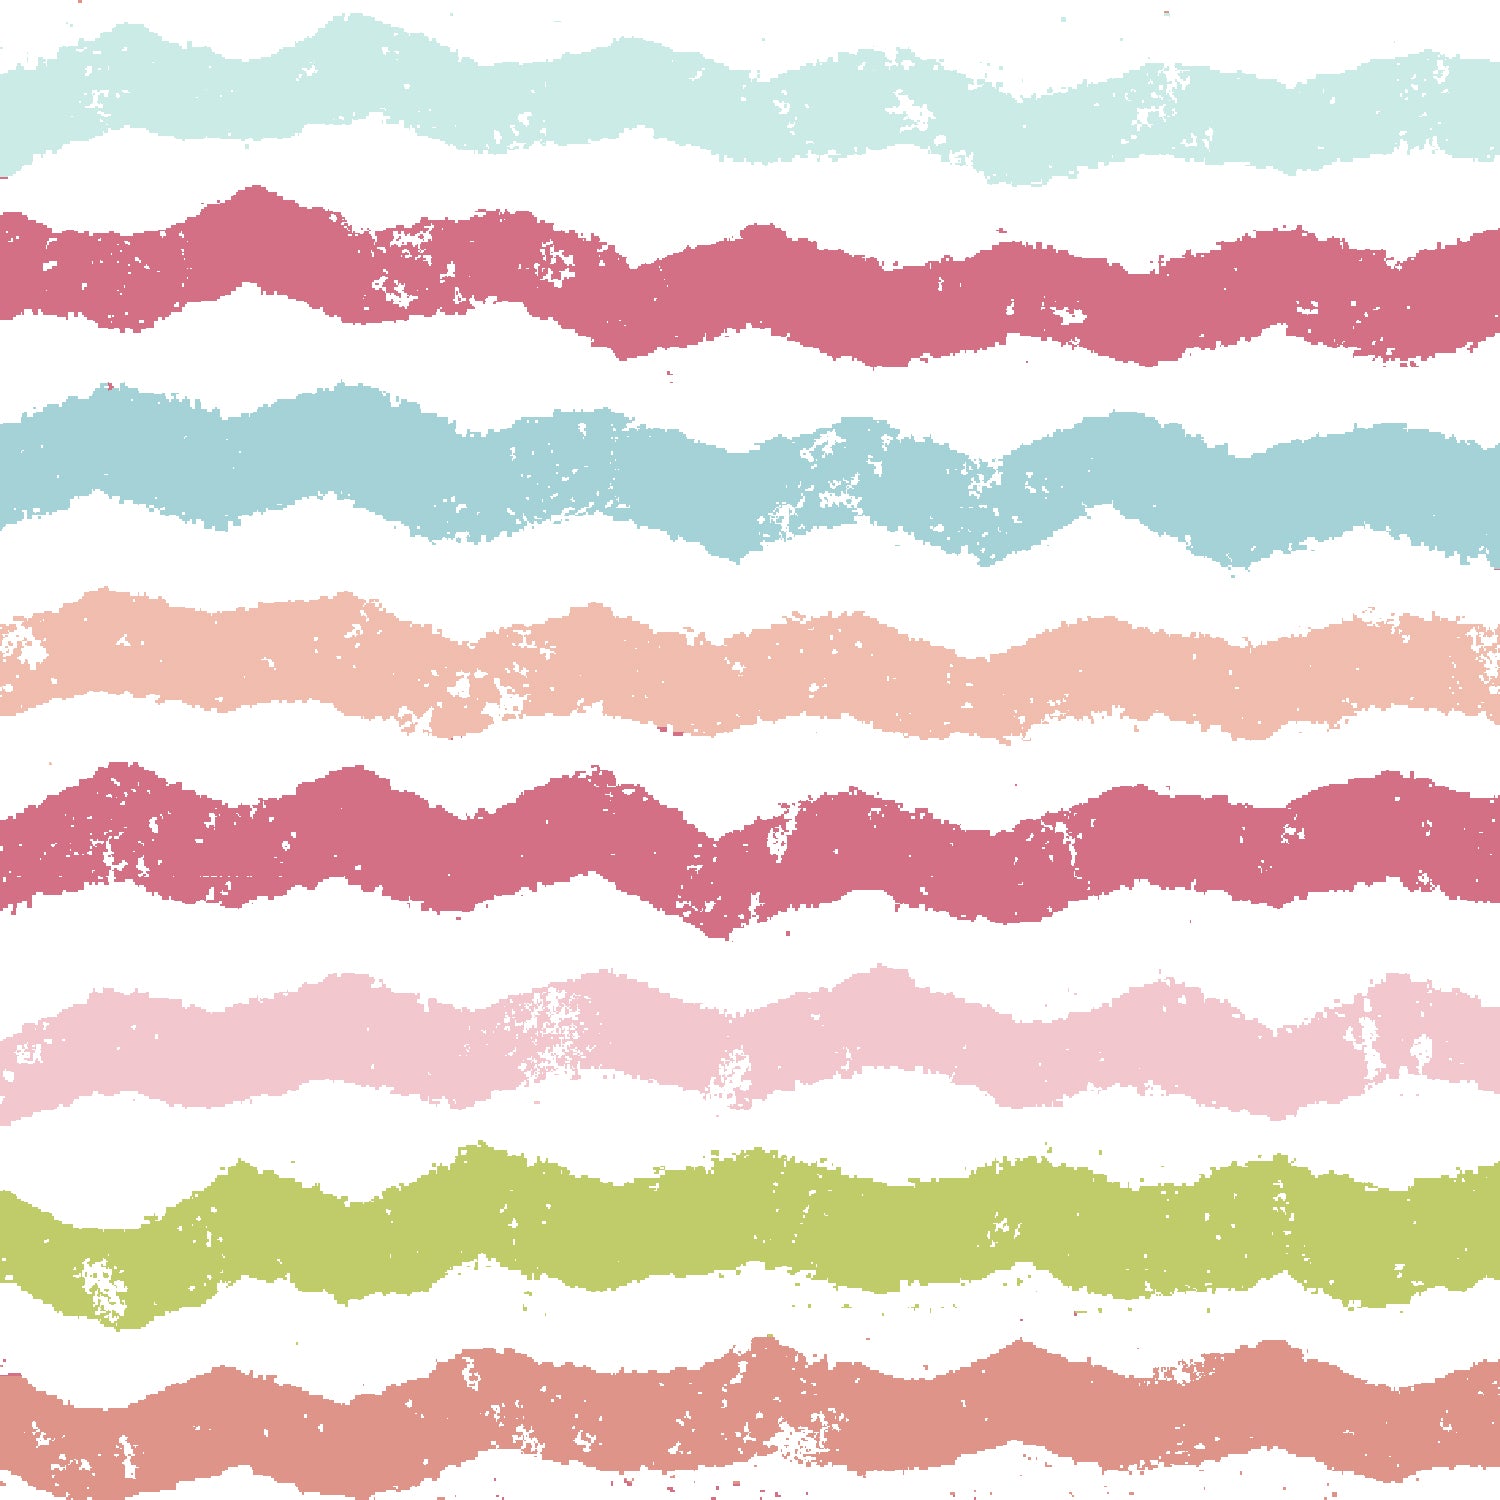 Waverly Inspirations Cotton 44" Crayon Stripe Coral Color Sewing Fabric by the Yard